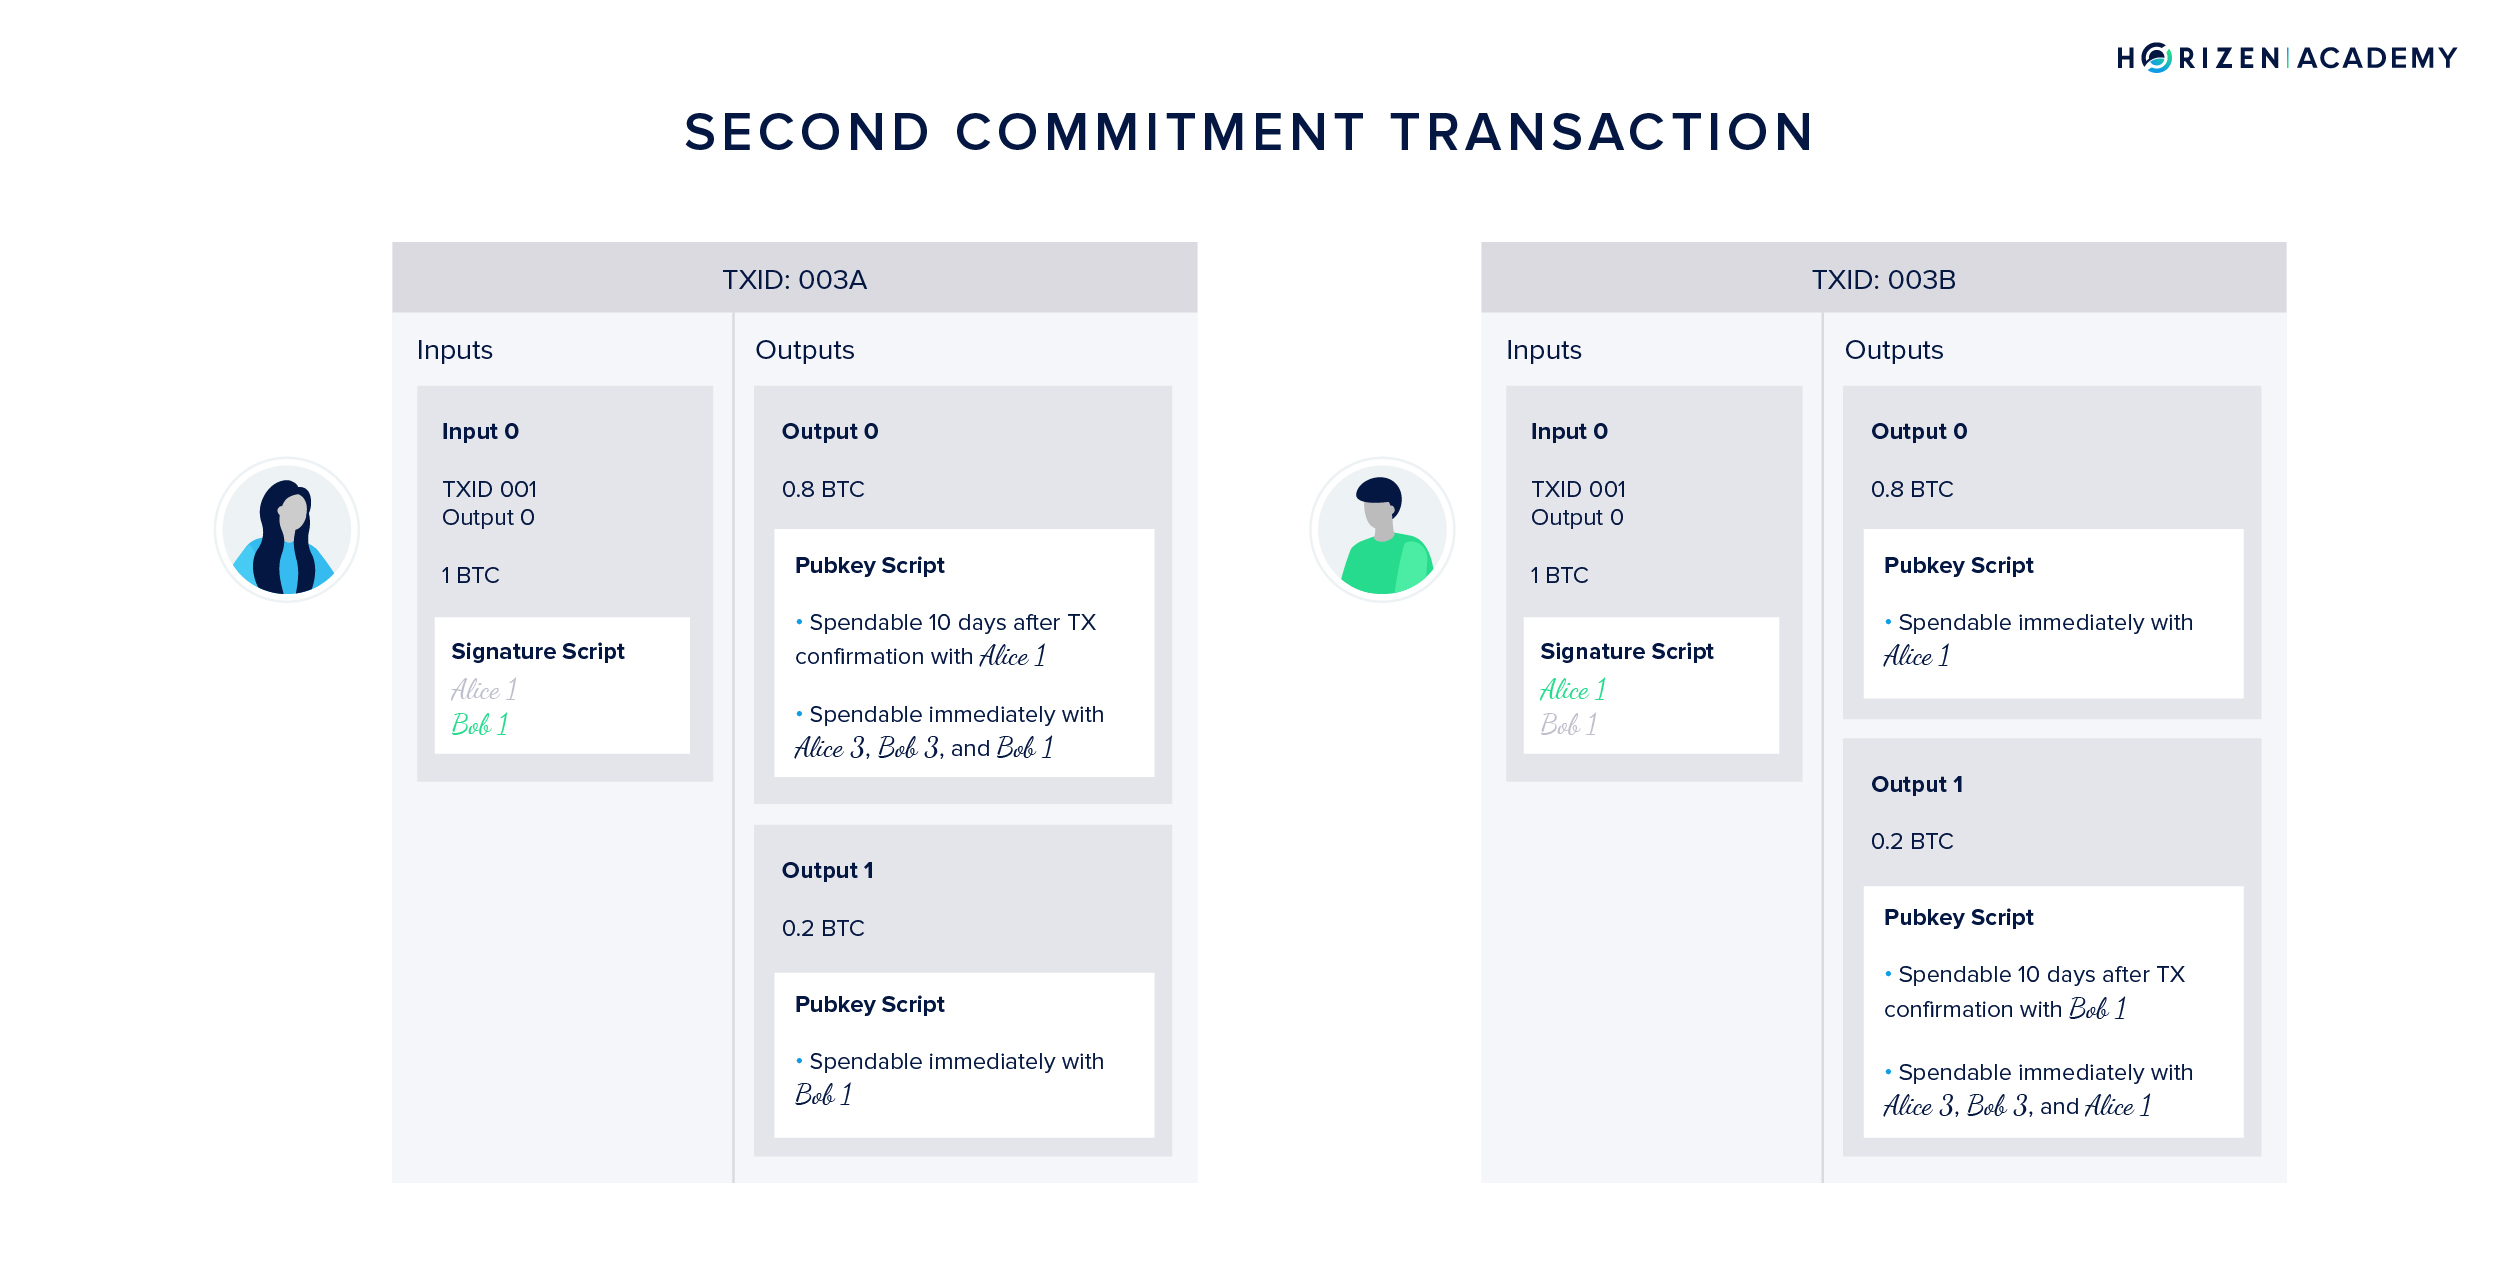 The first channel update happening in the second commitment transaction